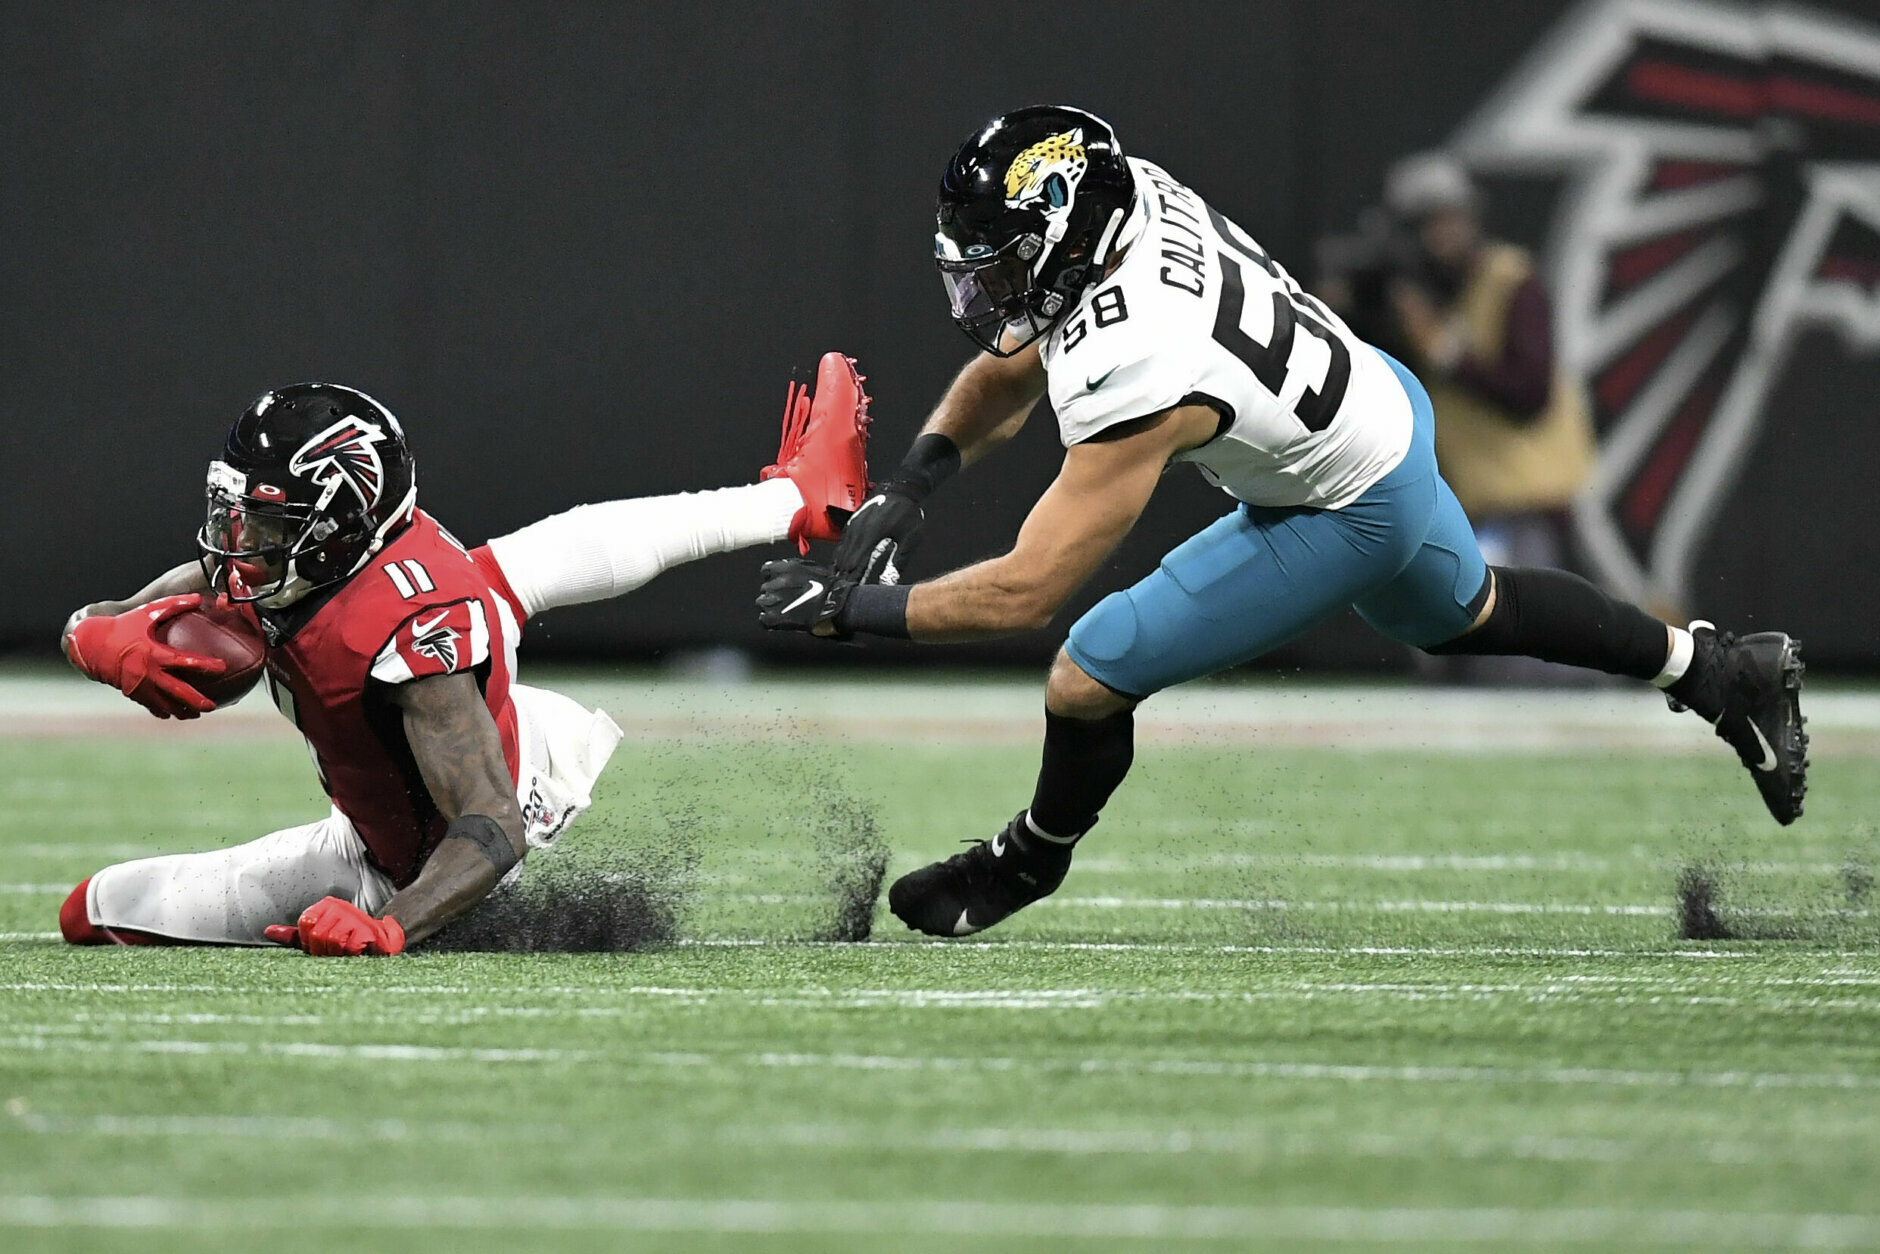 <p><b><i>Jaguars 12</i></b><br />
<b><i>Falcons 24</i></b></p>
<p>Jacksonville <a href="https://profootballtalk.nbcsports.com/2019/12/19/jaguars-turn-back-the-clocks-after-firing-tom-coughlin/" target="_blank" rel="noopener" data-saferedirecturl="https://www.google.com/url?q=https://profootballtalk.nbcsports.com/2019/12/19/jaguars-turn-back-the-clocks-after-firing-tom-coughlin/&amp;source=gmail&amp;ust=1577160325114000&amp;usg=AFQjCNHwtTIsWUbgTFvU9MbbOPMjMda6Kg">finally got their clocks right</a> but not in time to save their lost season, while Atlanta finally looked like the team it should have been all along, going 5-2 after an awful 1-7 start. It&#8217;s hard to make a case for Dan Quinn to return but it&#8217;s also easy to see the Falcons replacing him with someone worse.</p>
